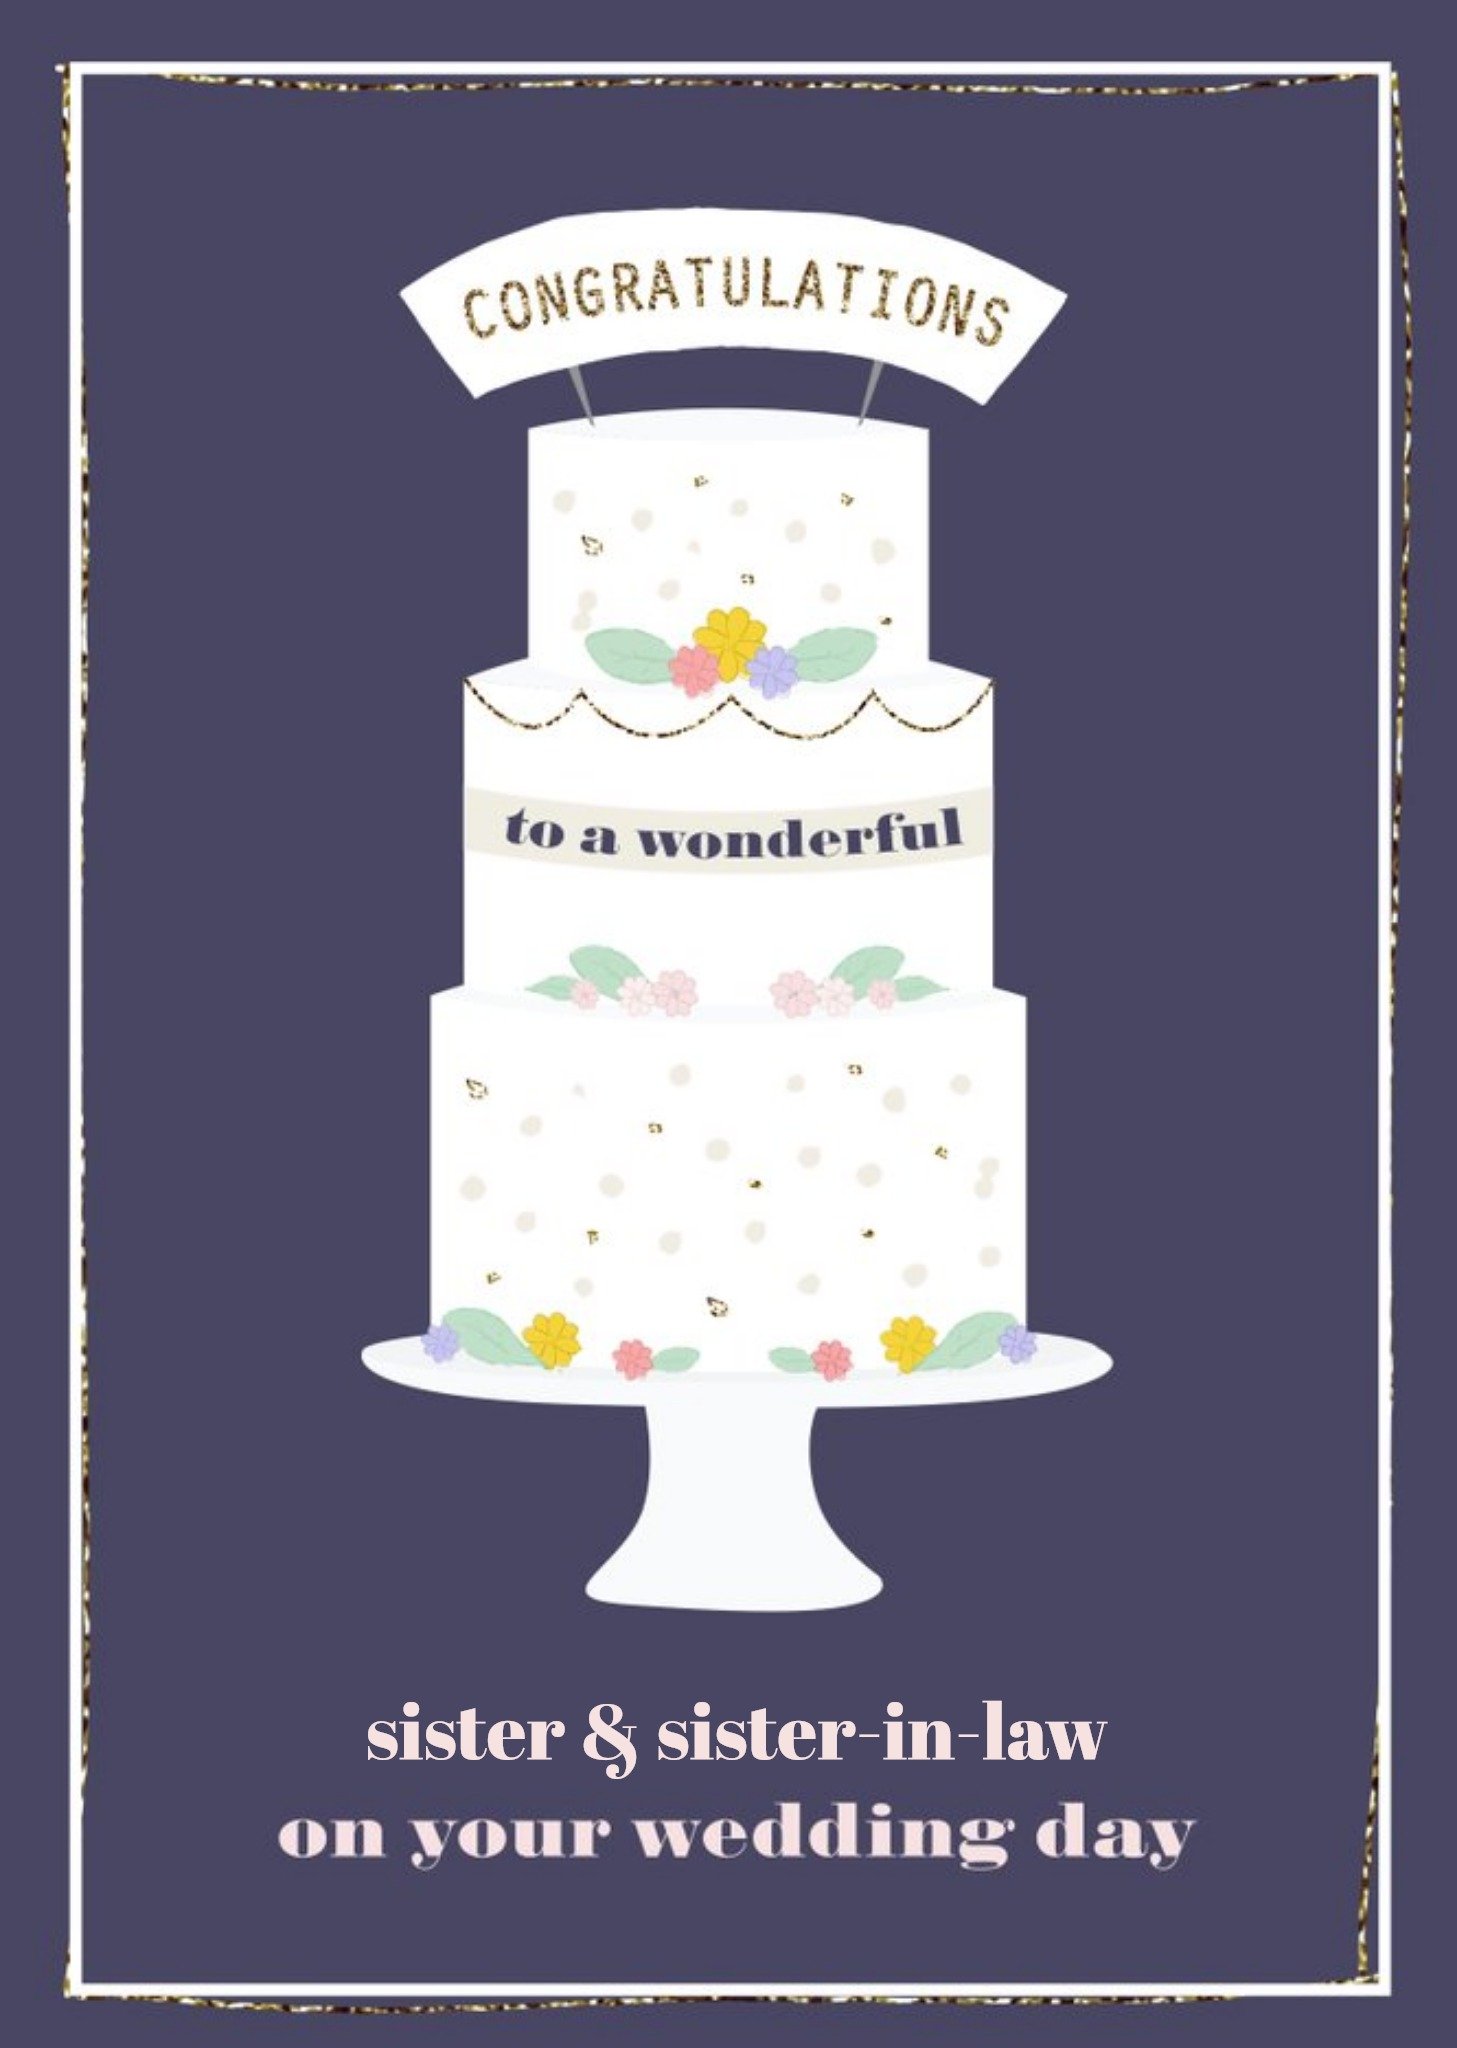 Moonpig Illustrated Wedding Cake Congratulations Sister And Sister In Law On Your Wedding Day Card E